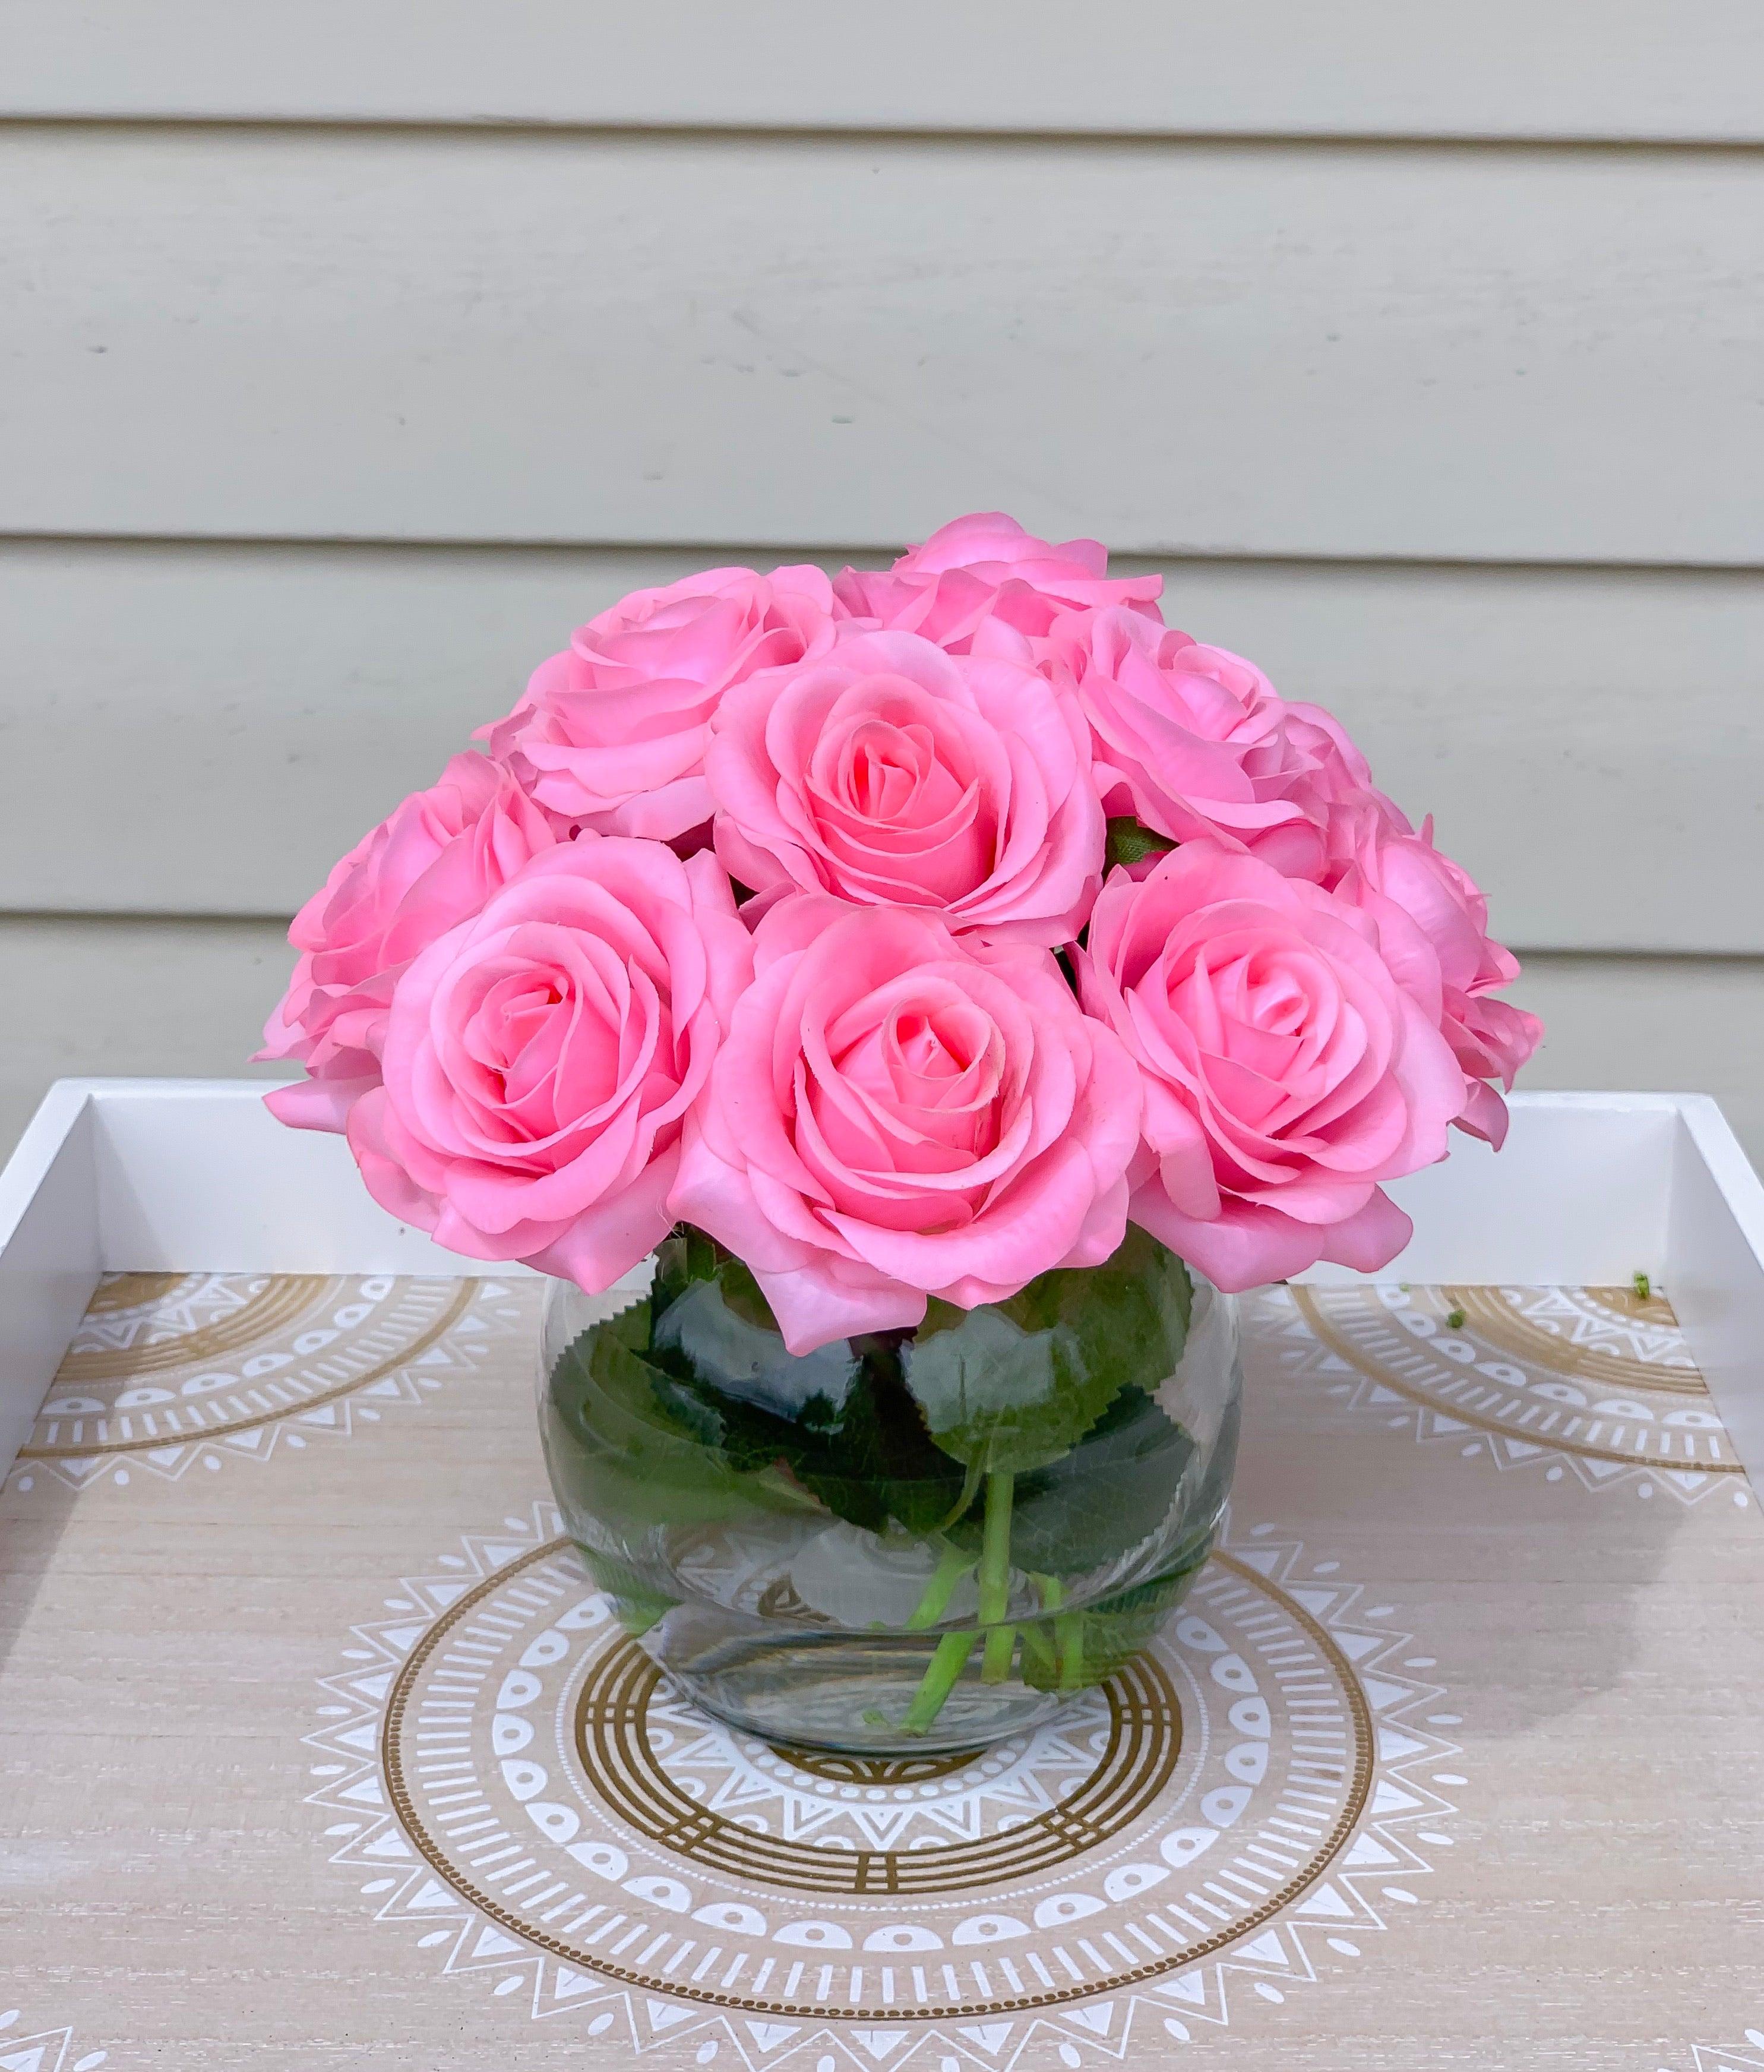 Real Touch Hot Pink Roses Arrangement-Pink Real Touch Flower Arrangement-Artificial Faux Silk Flowers-Real Touch Roses-Centerpiece-Pink Rose - Flovery